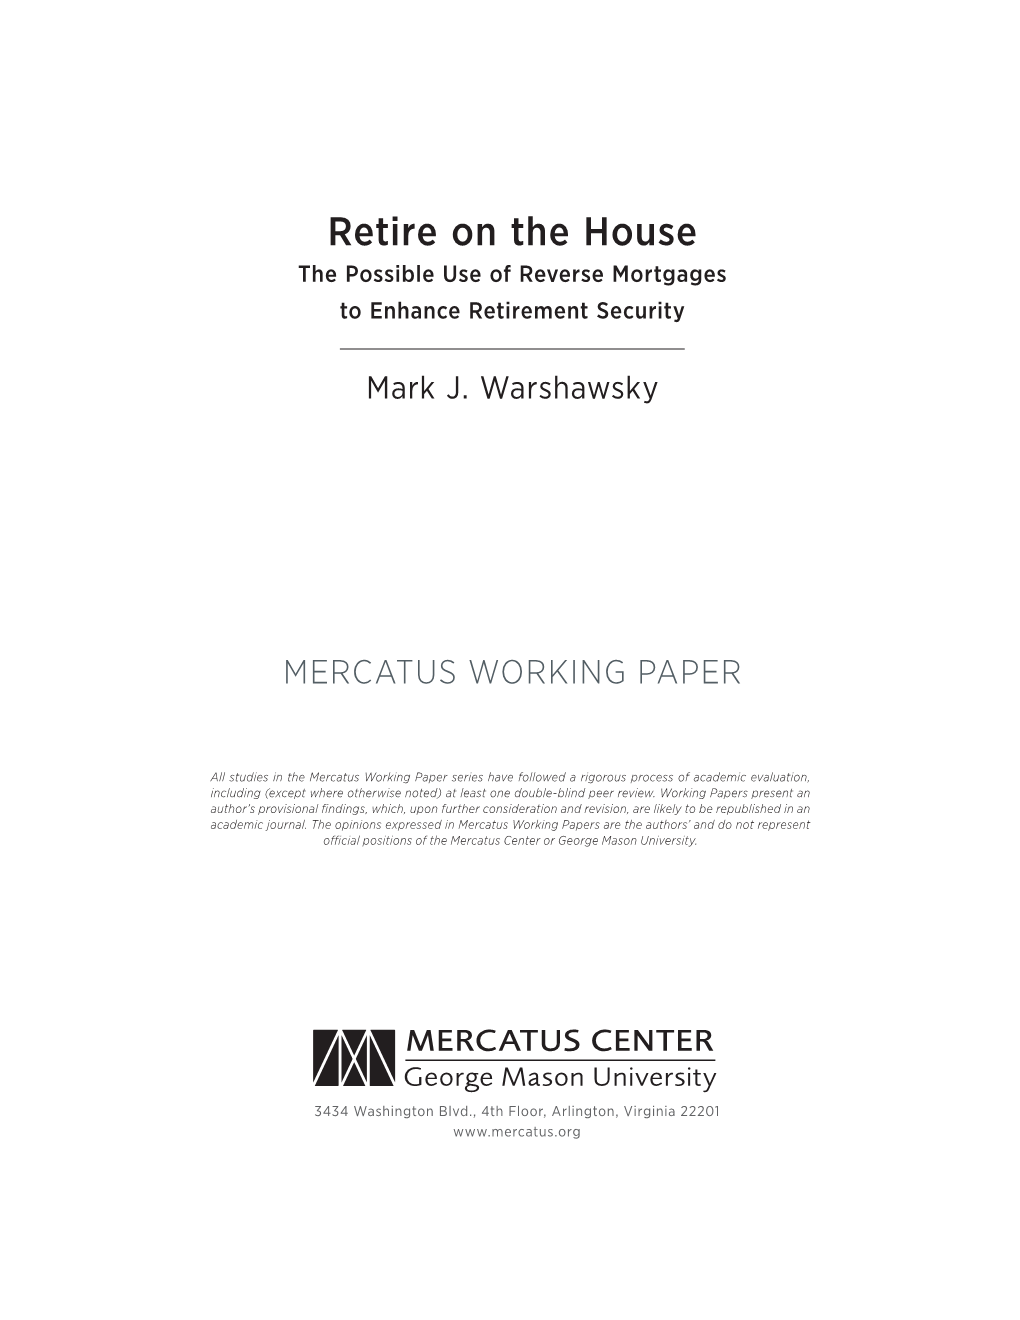 Retire on the House: the Possible Use of Reverse Mortgages To